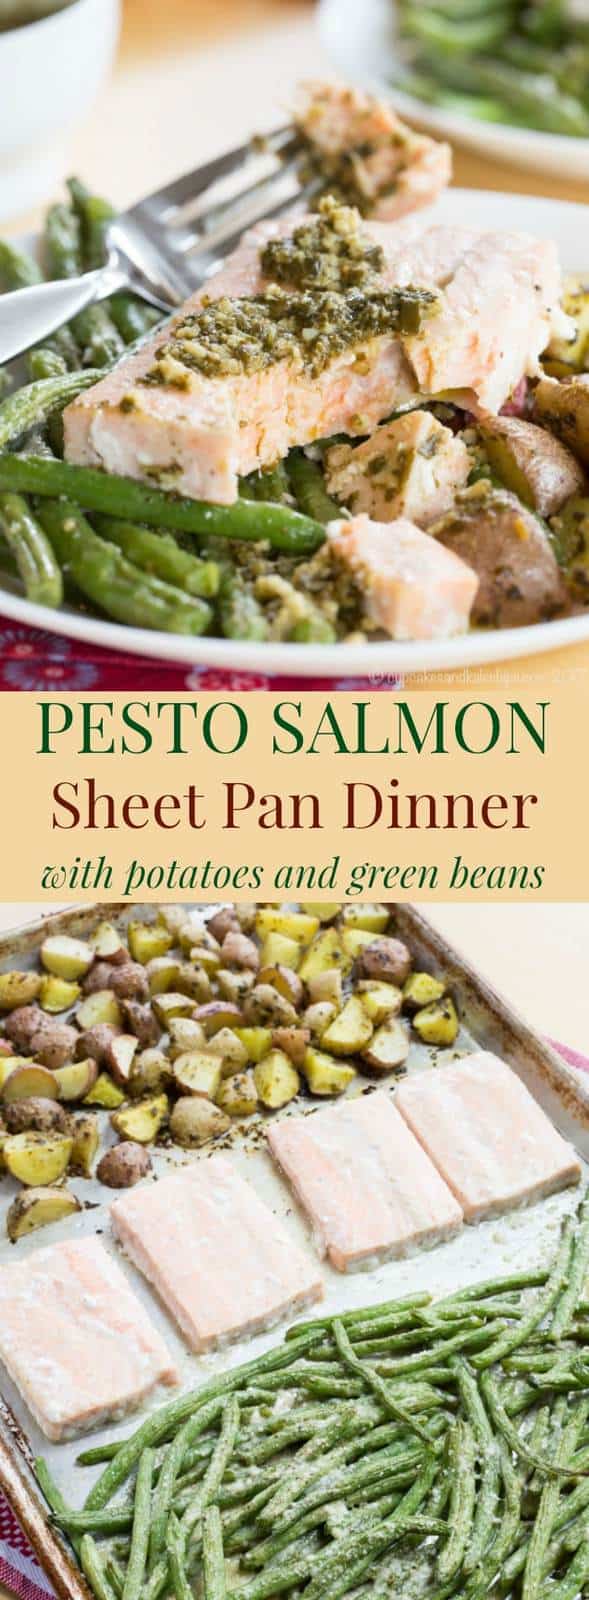 Pesto Salmon Sheet Pan Dinner with Potatoes and Green Beans - an easy dinner recipe that's ready in less than forty minutes with only one pan to clean up. This seafood sheet pan meal made with @GortonsSeafood is a healthy and gluten free addition to your weekly meal plan. #AD